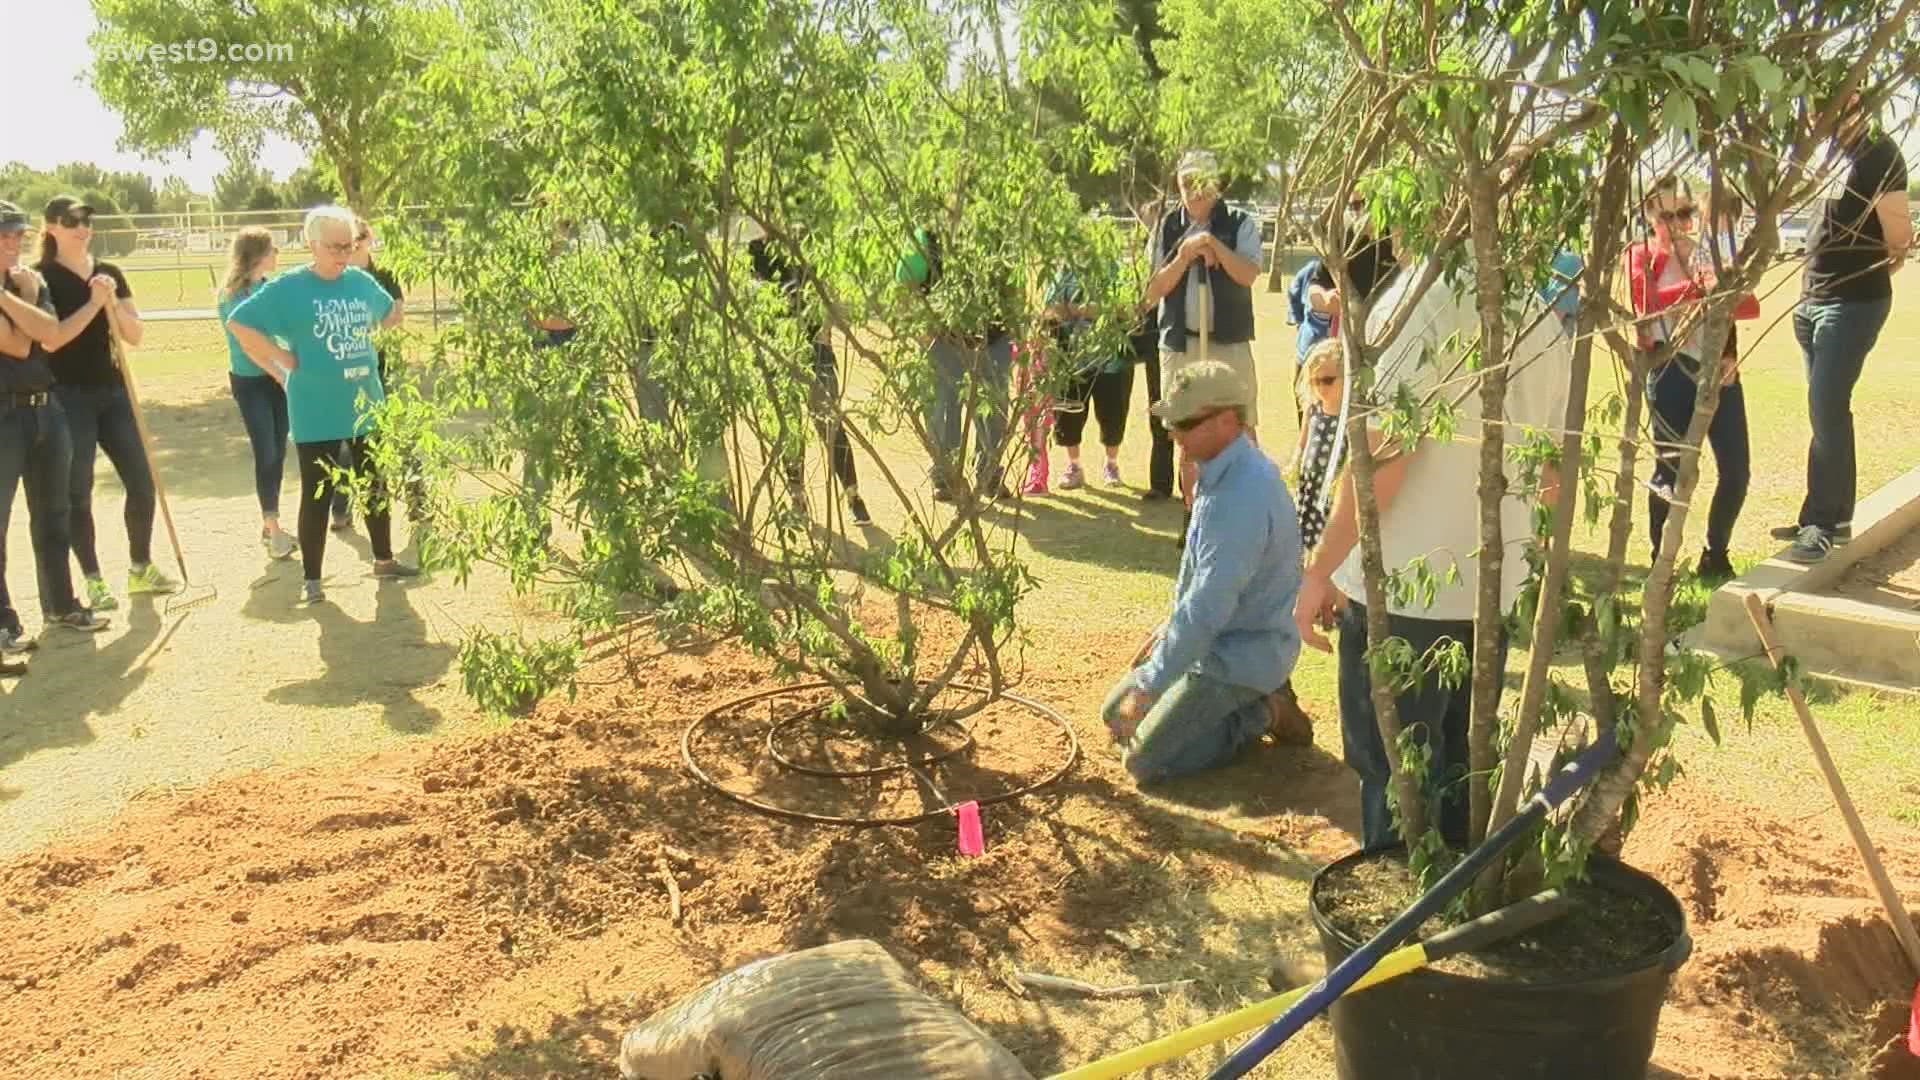 Every year the company donates thousands of trees to nonprofits in areas of West Texas that have very little tree coverage.